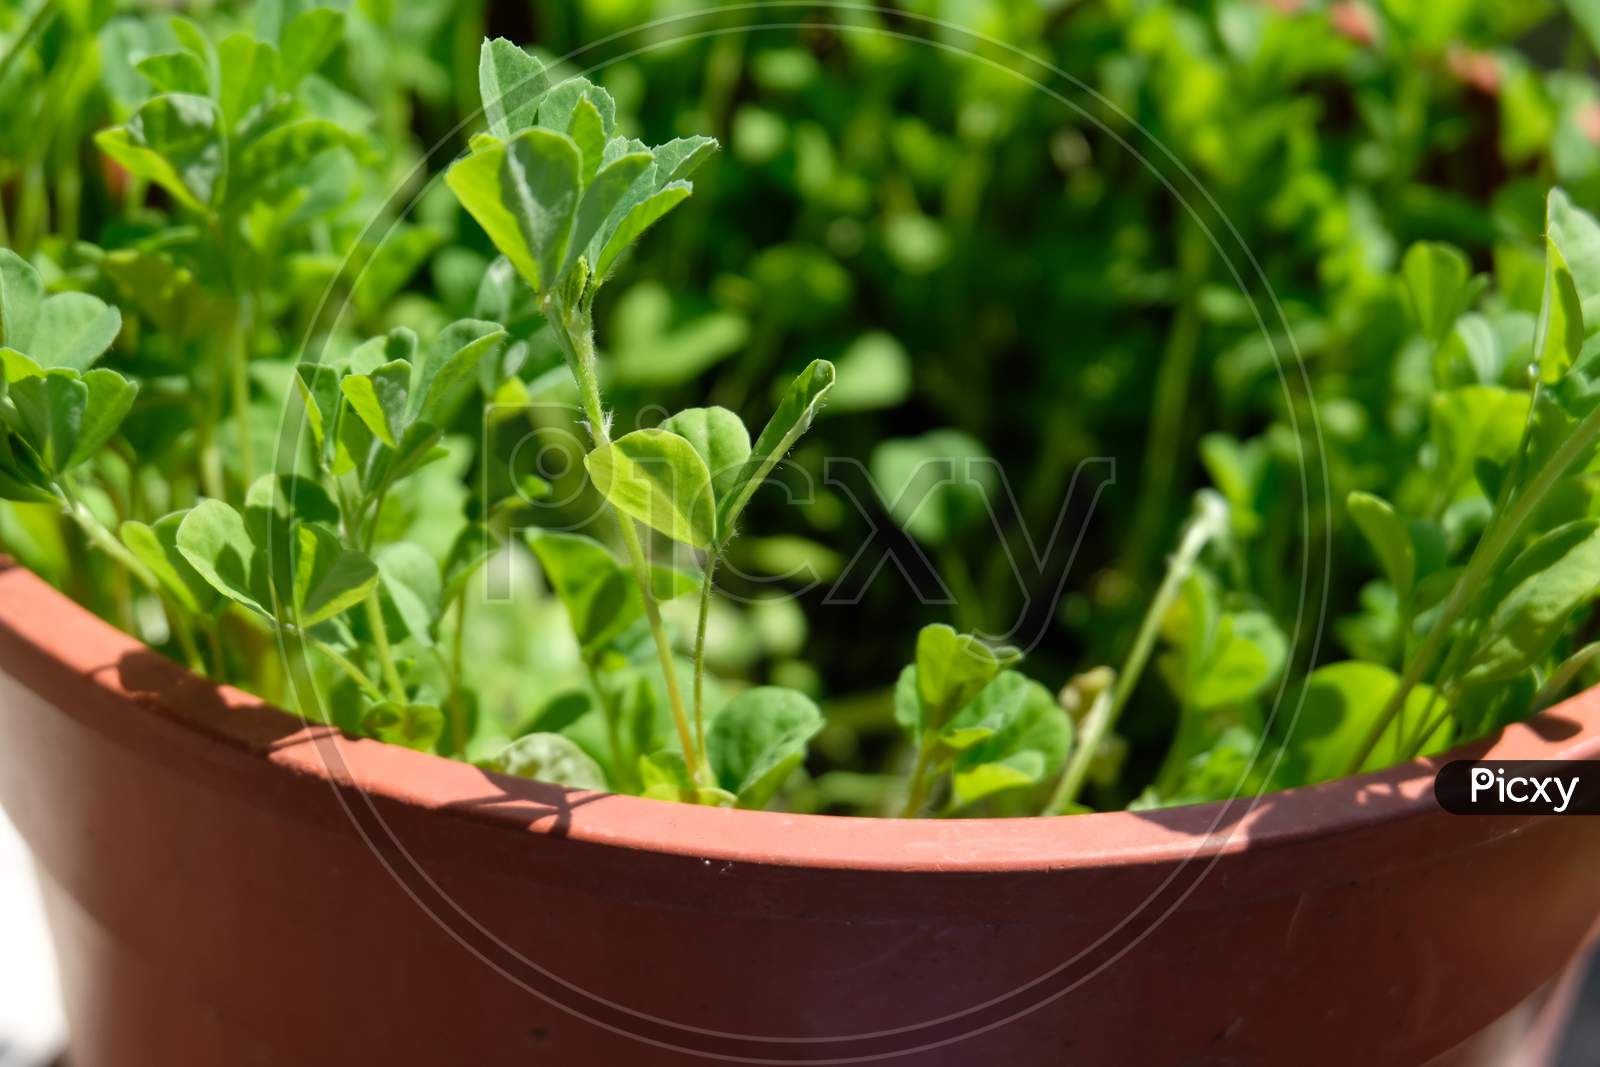 Fenugreek plants pictured with the pot.